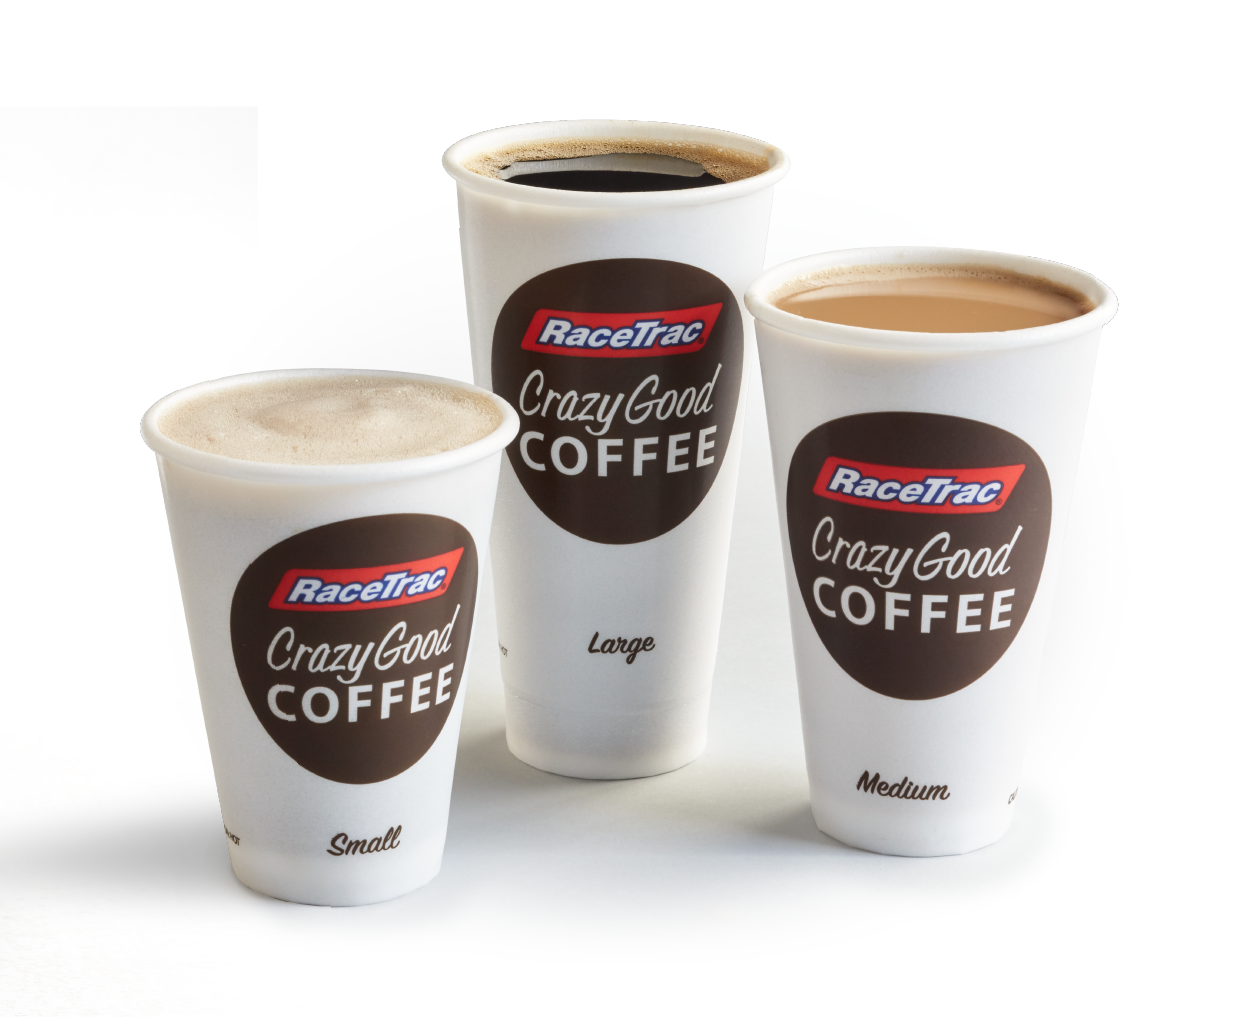 Racetrac Coffee Review - Best Gas Station Coffee Ever? - Clearly